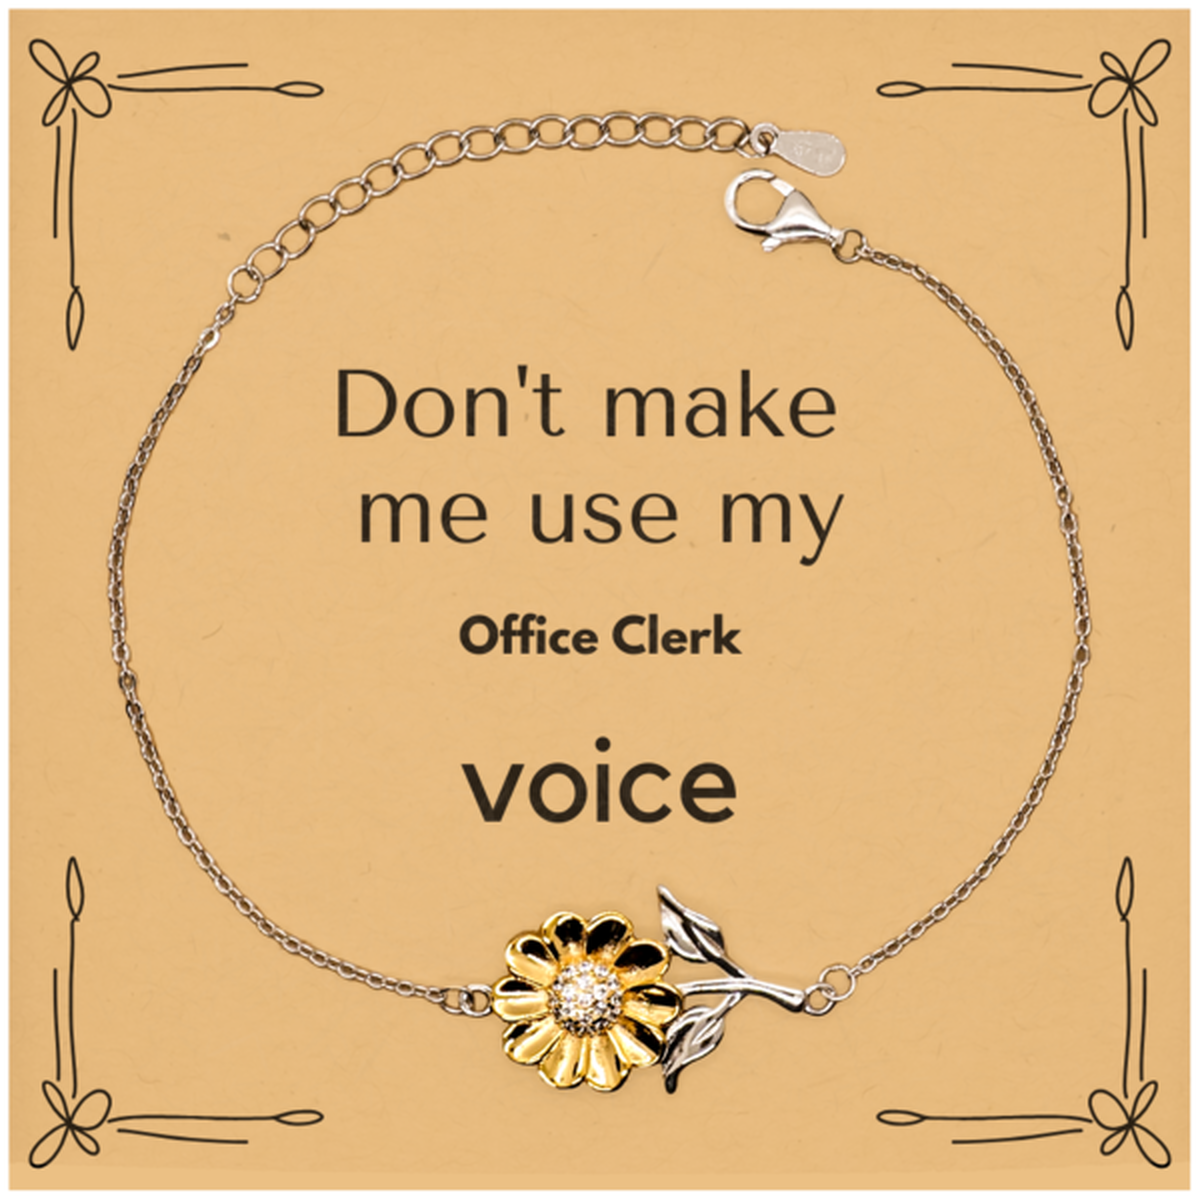 Don't make me use my Office Clerk voice, Sarcasm Office Clerk Card Gifts, Christmas Office Clerk Sunflower Bracelet Birthday Unique Gifts For Office Clerk Coworkers, Men, Women, Colleague, Friends